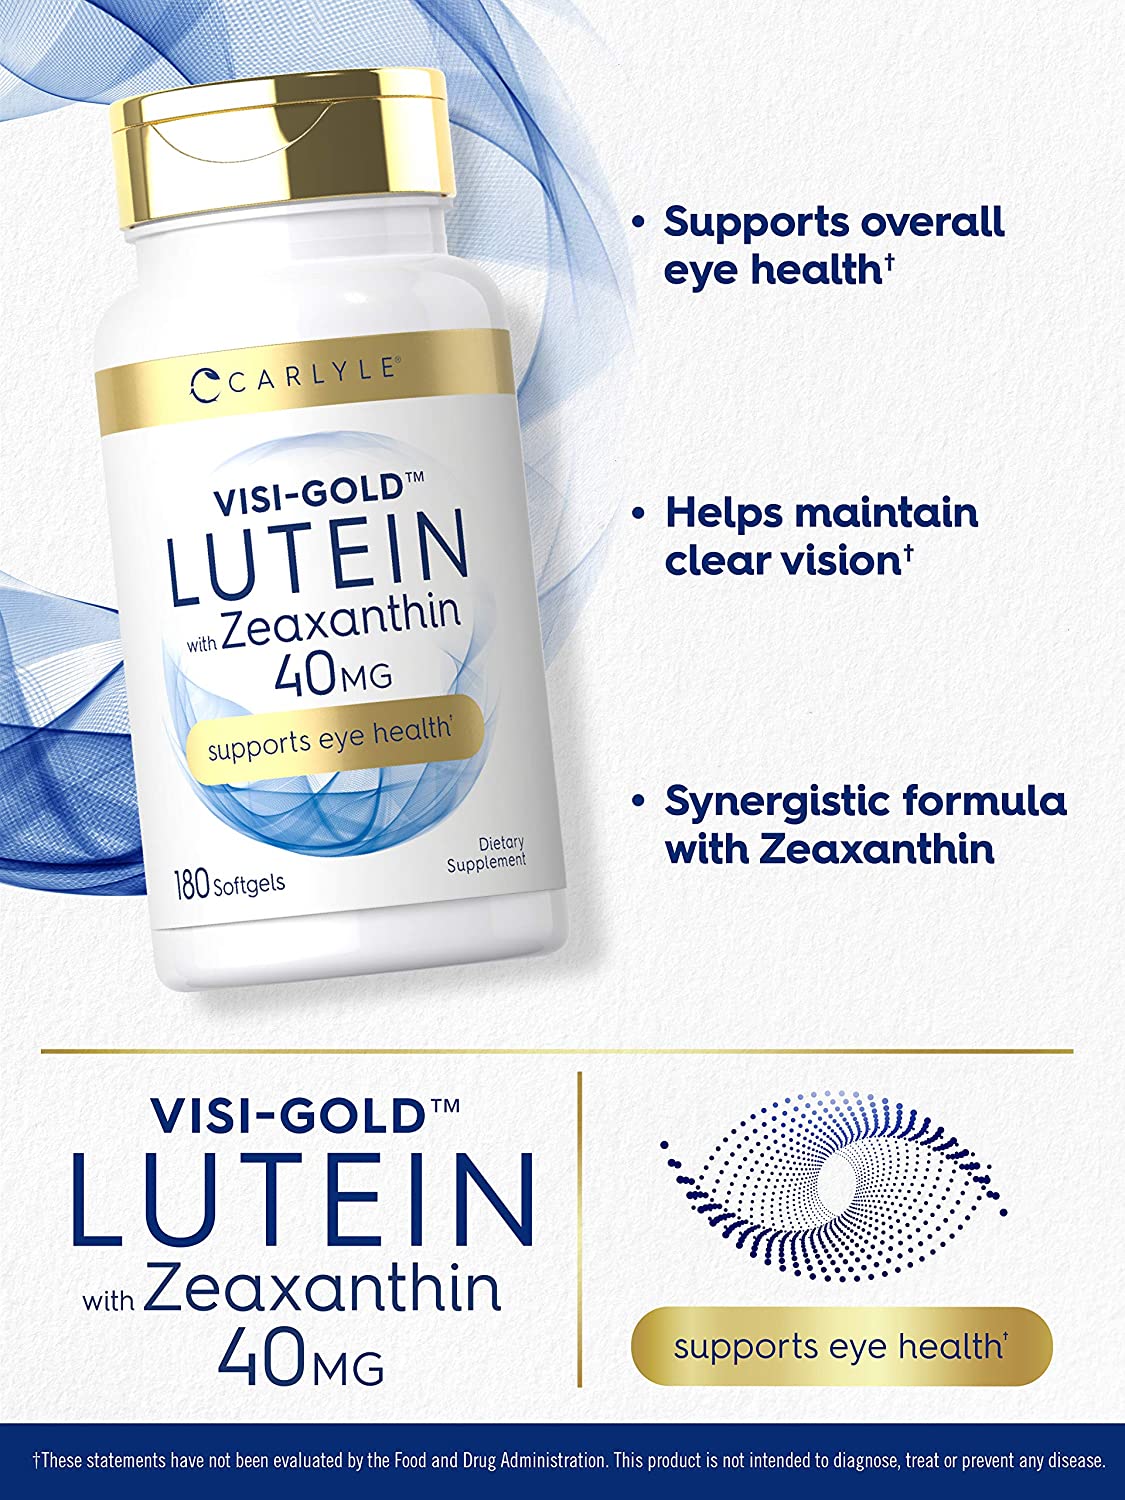 Carlyle Visi-Gold Lutein and Zeaxanthin 40Mg. 180 Capsulas